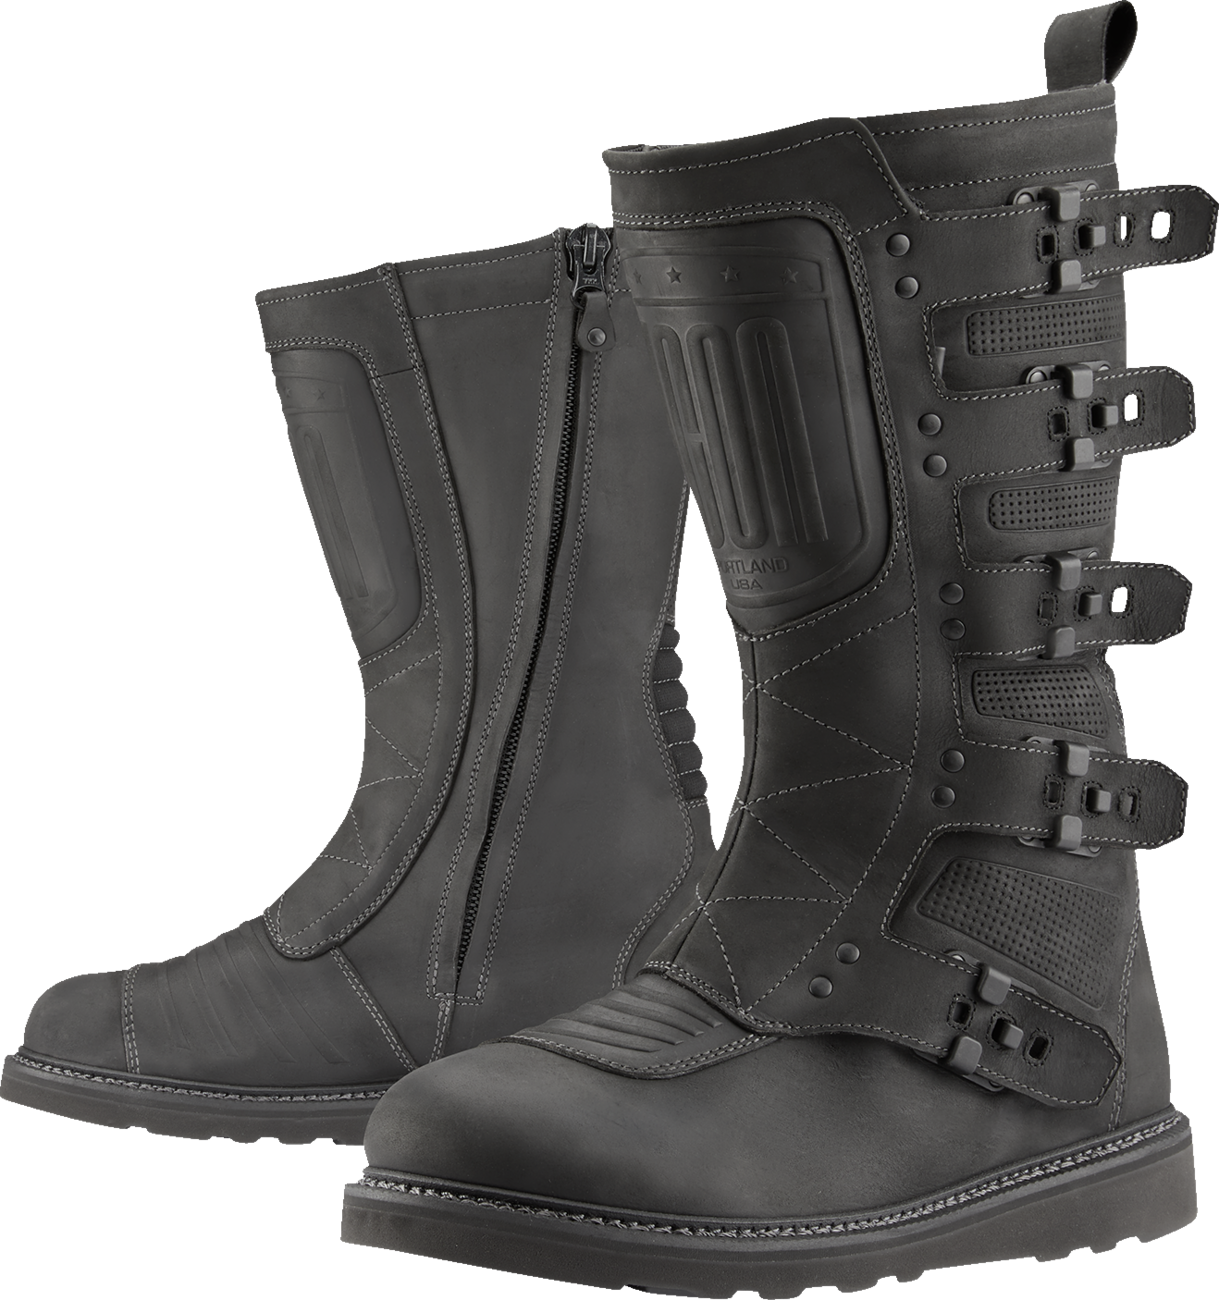 ICON Elsinore 2™ CE Boots - Black - Size 7 3403-1208